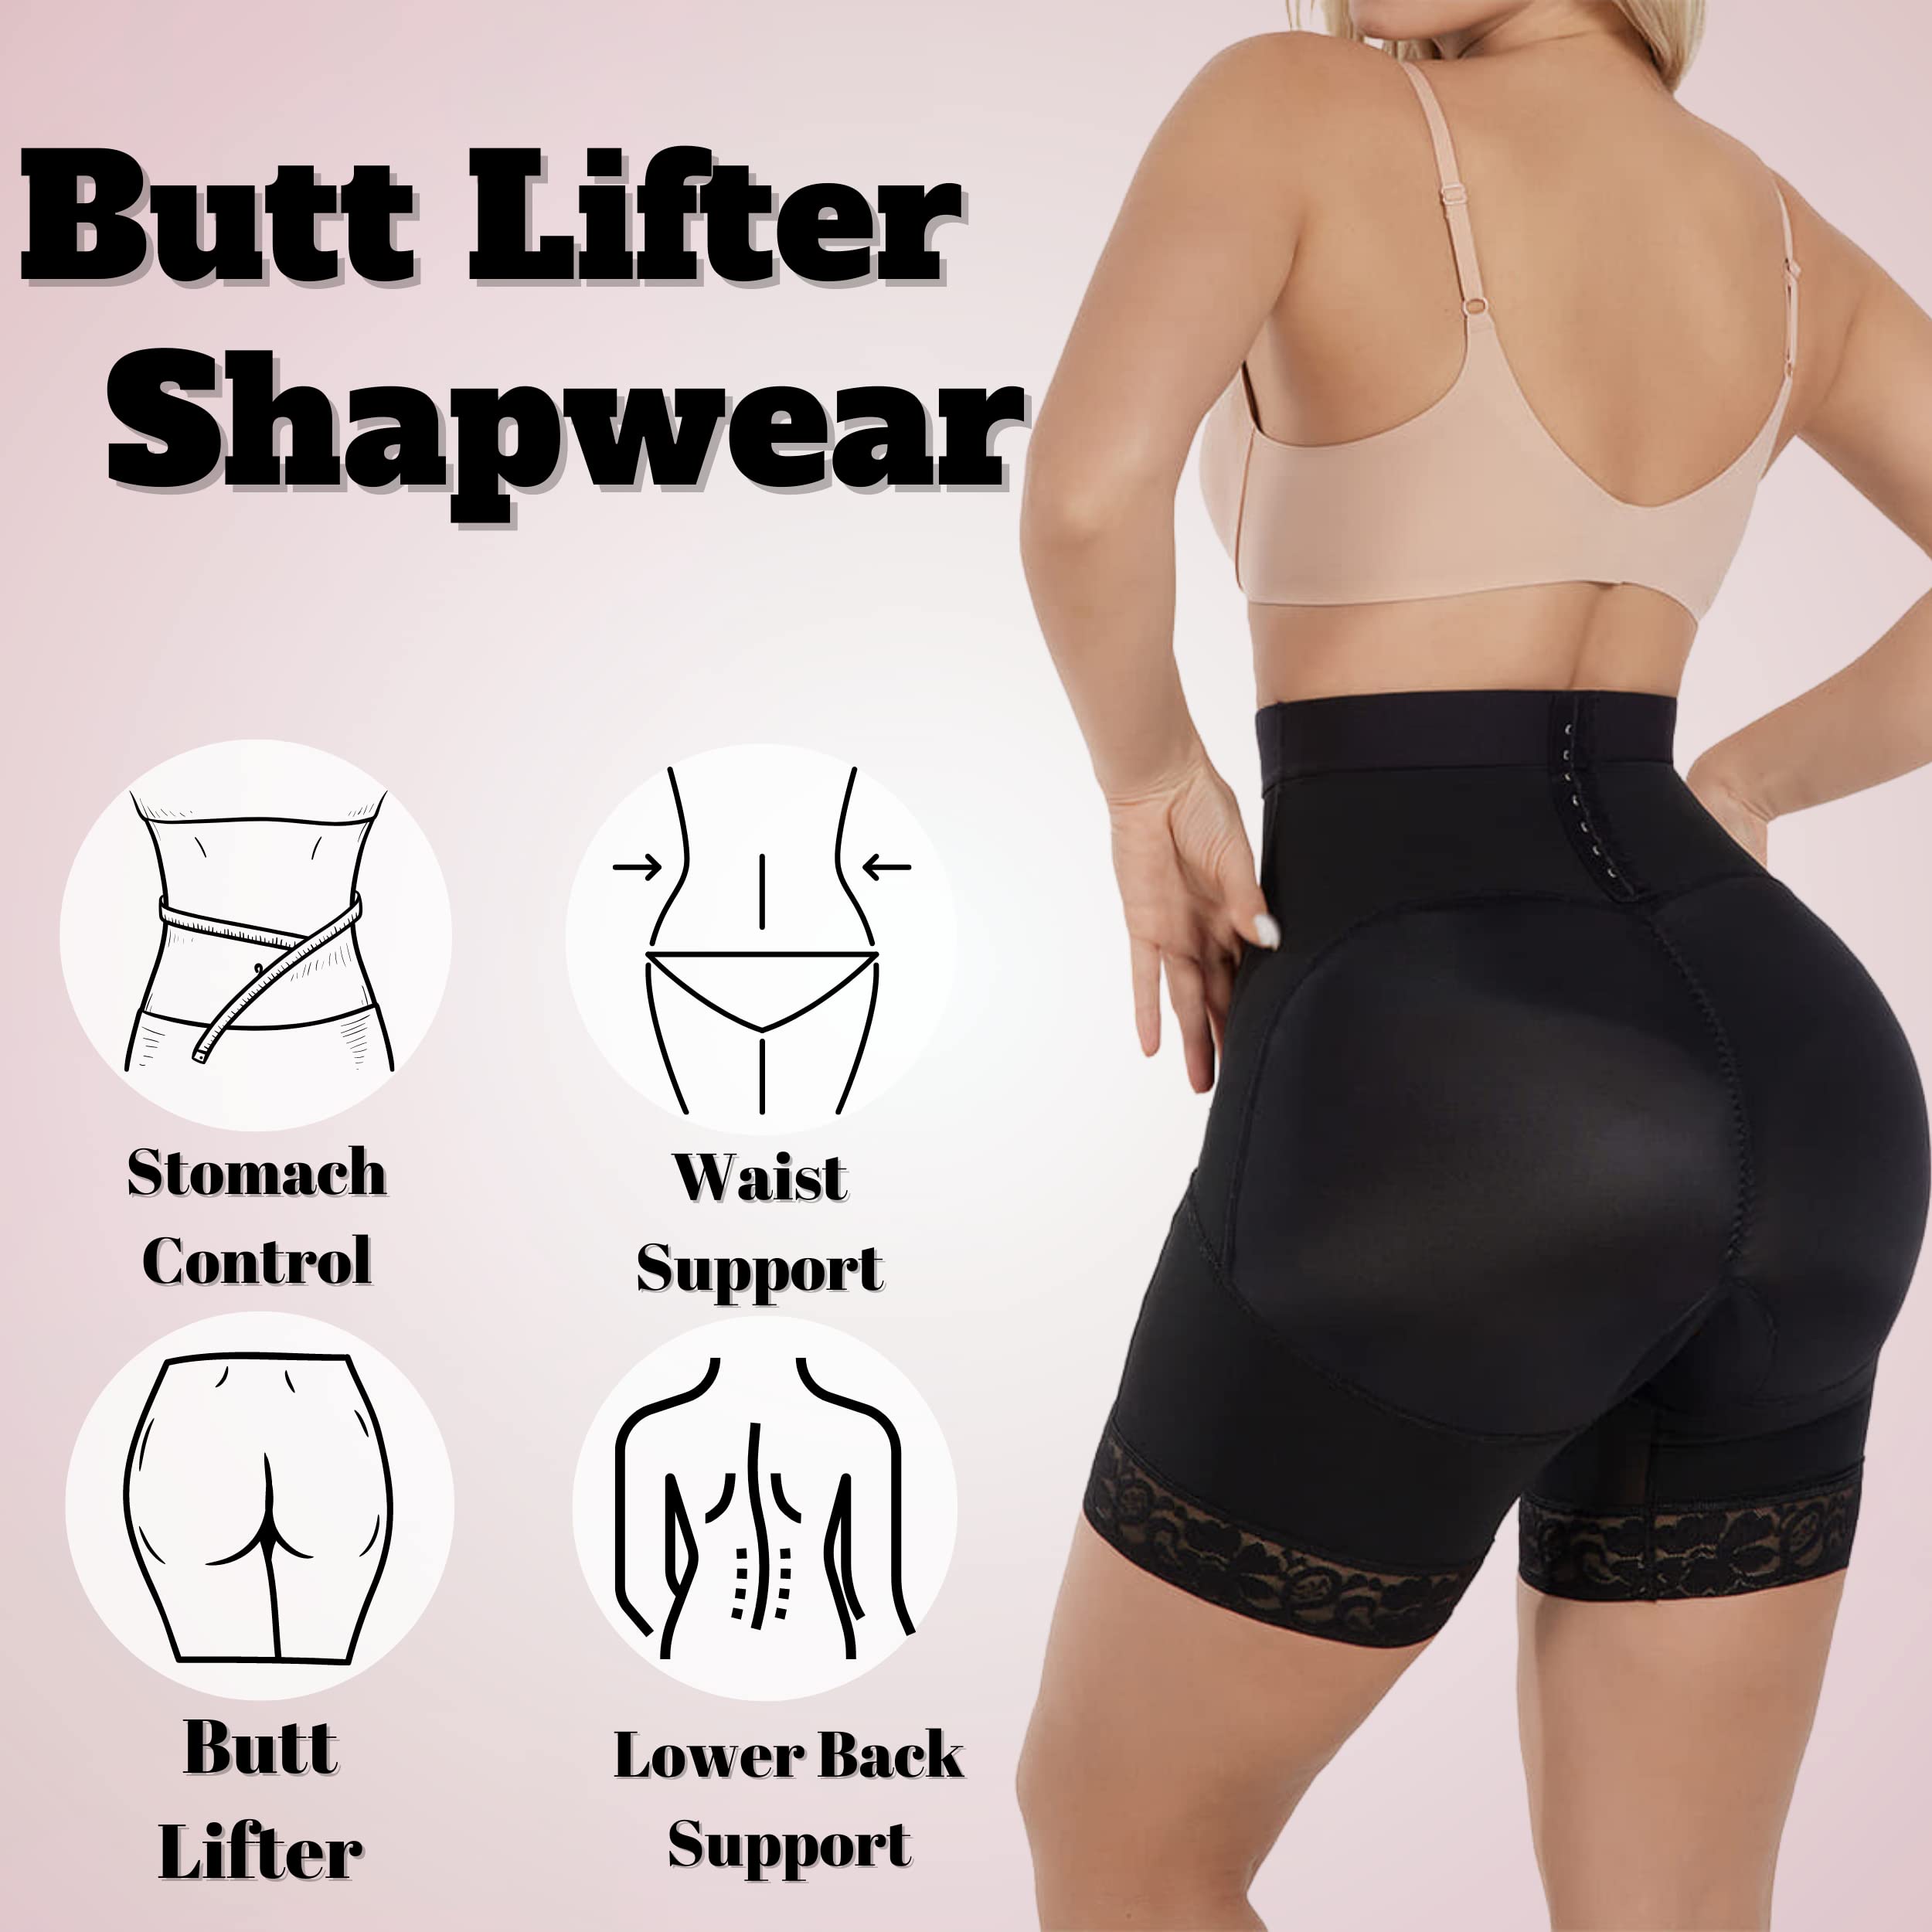 Waist trainer for Women with Butt Lifter Shorts - Removable Snatch Me Up Wrap for Lower Belly